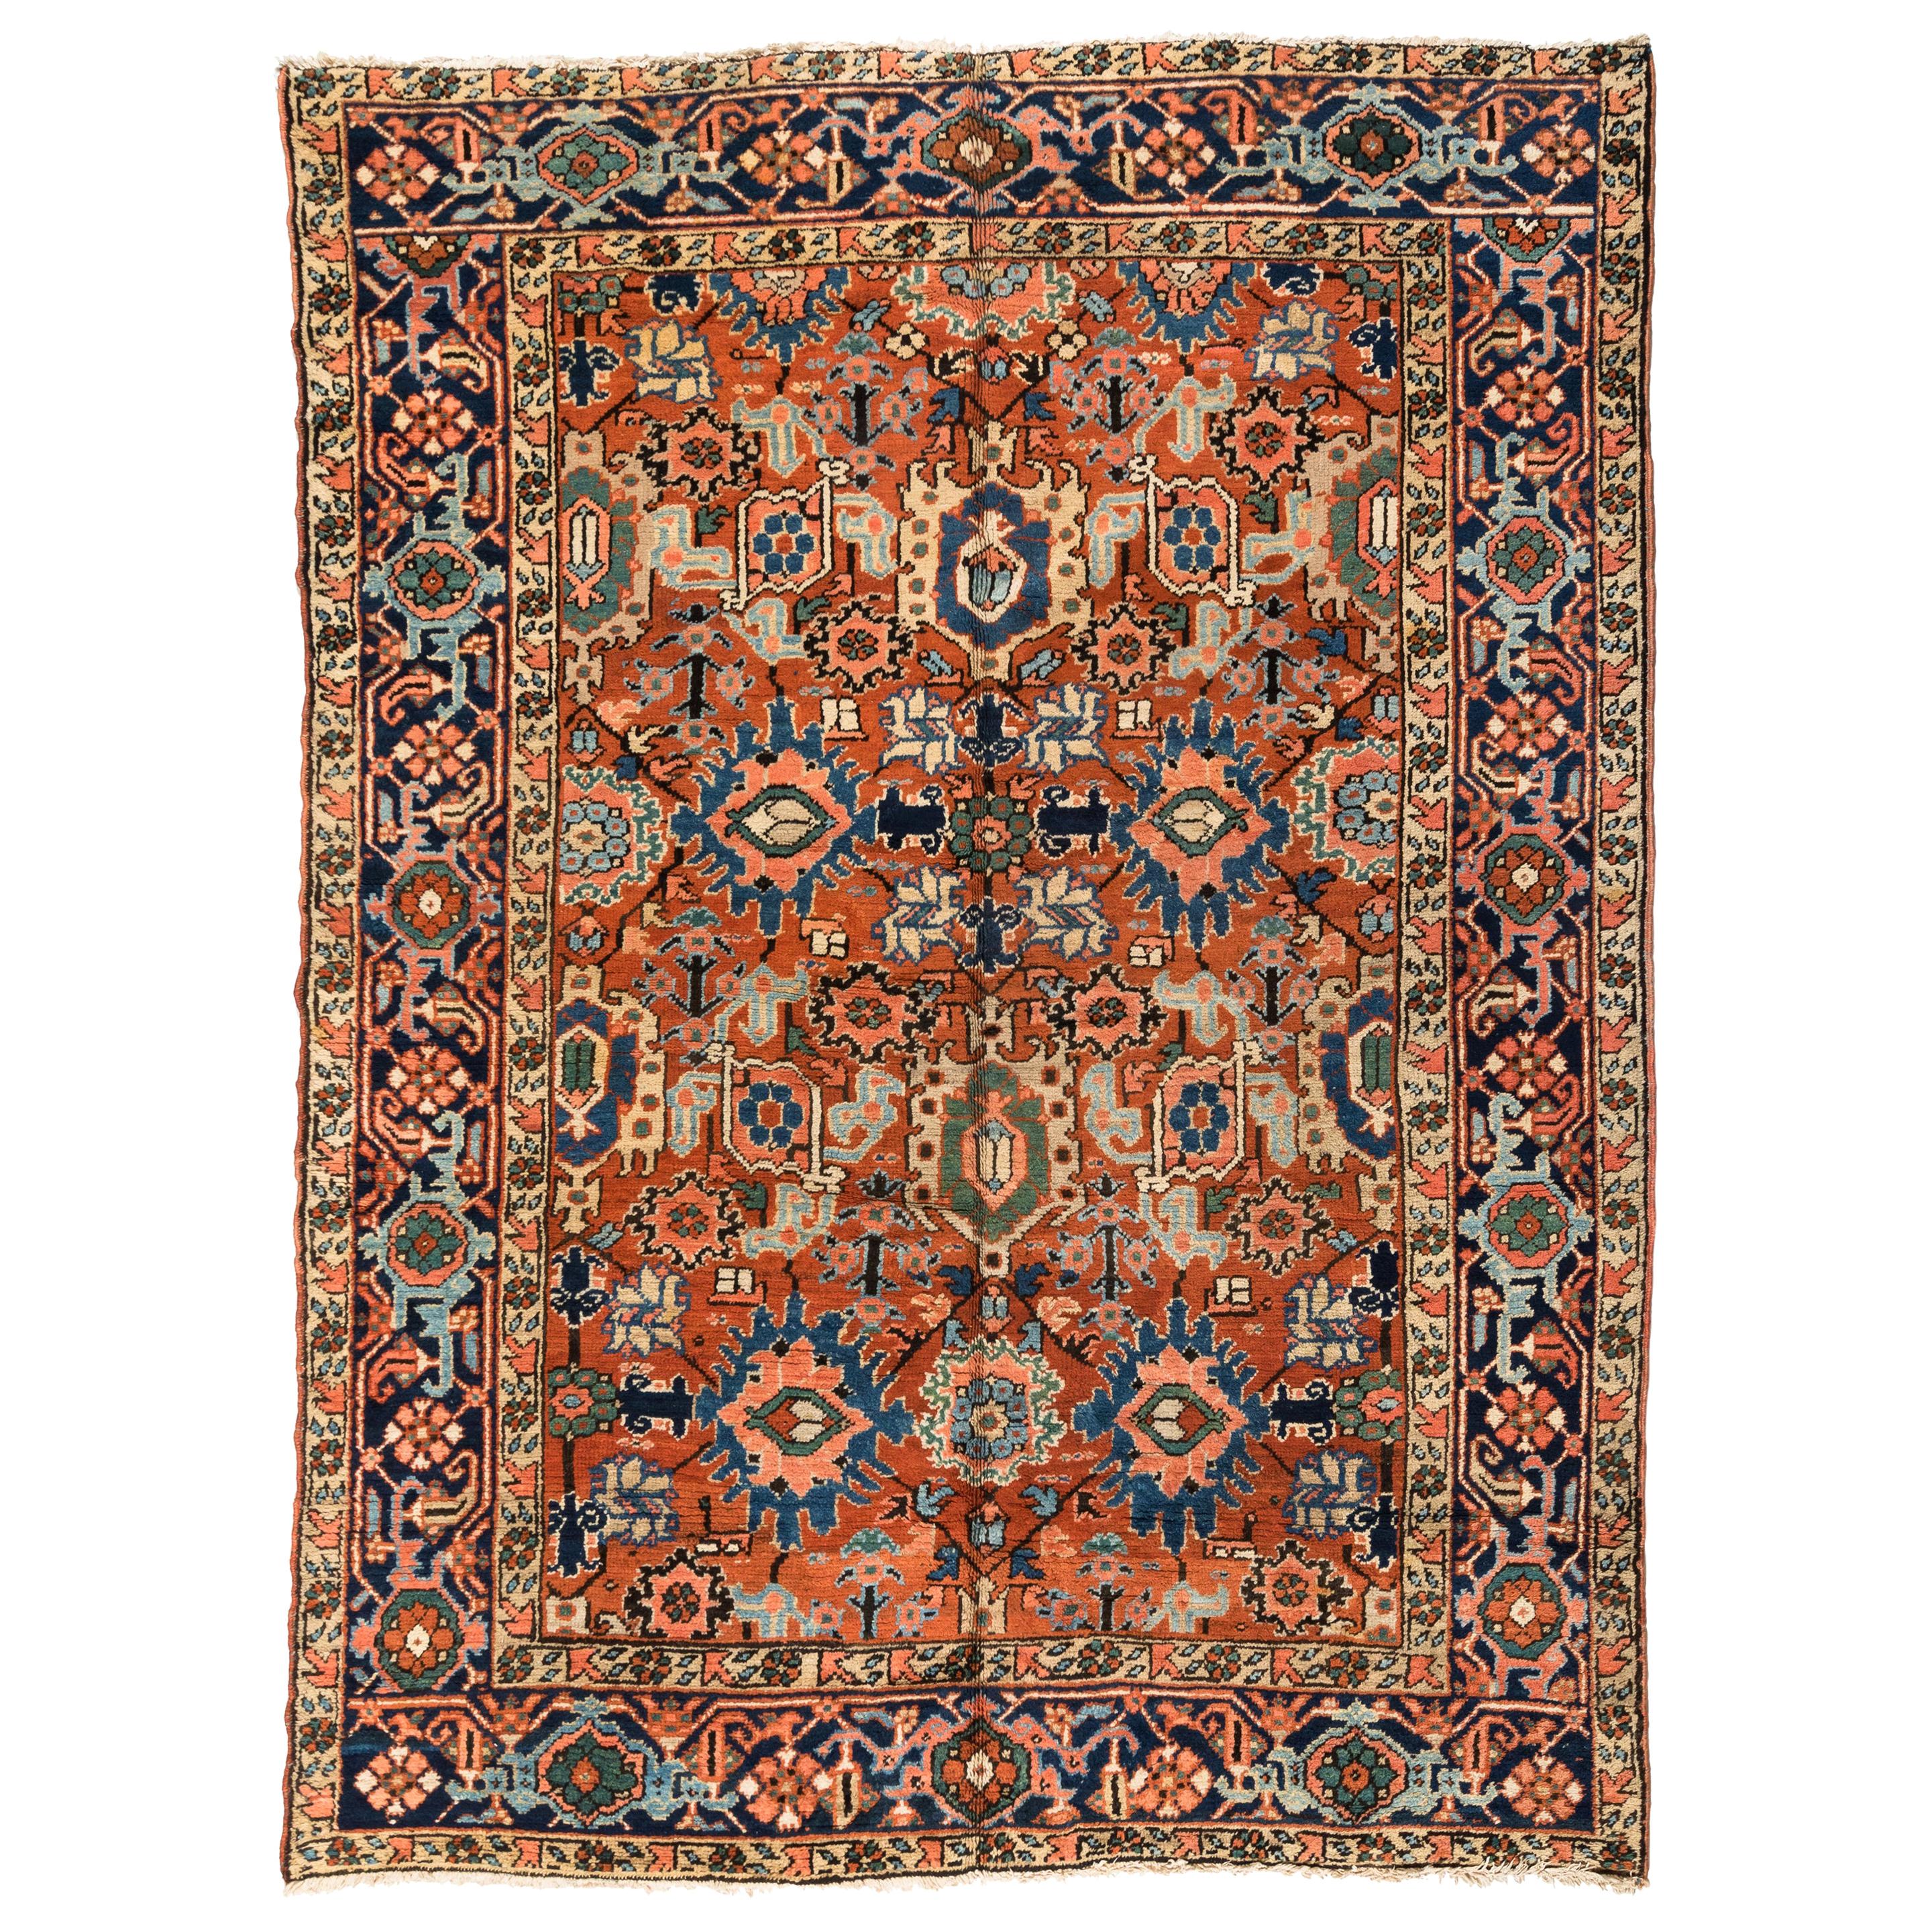 Antique Navy Blue Rust and Brown Green Persian Heriz Rug  8.2 x 10.6 ft For Sale